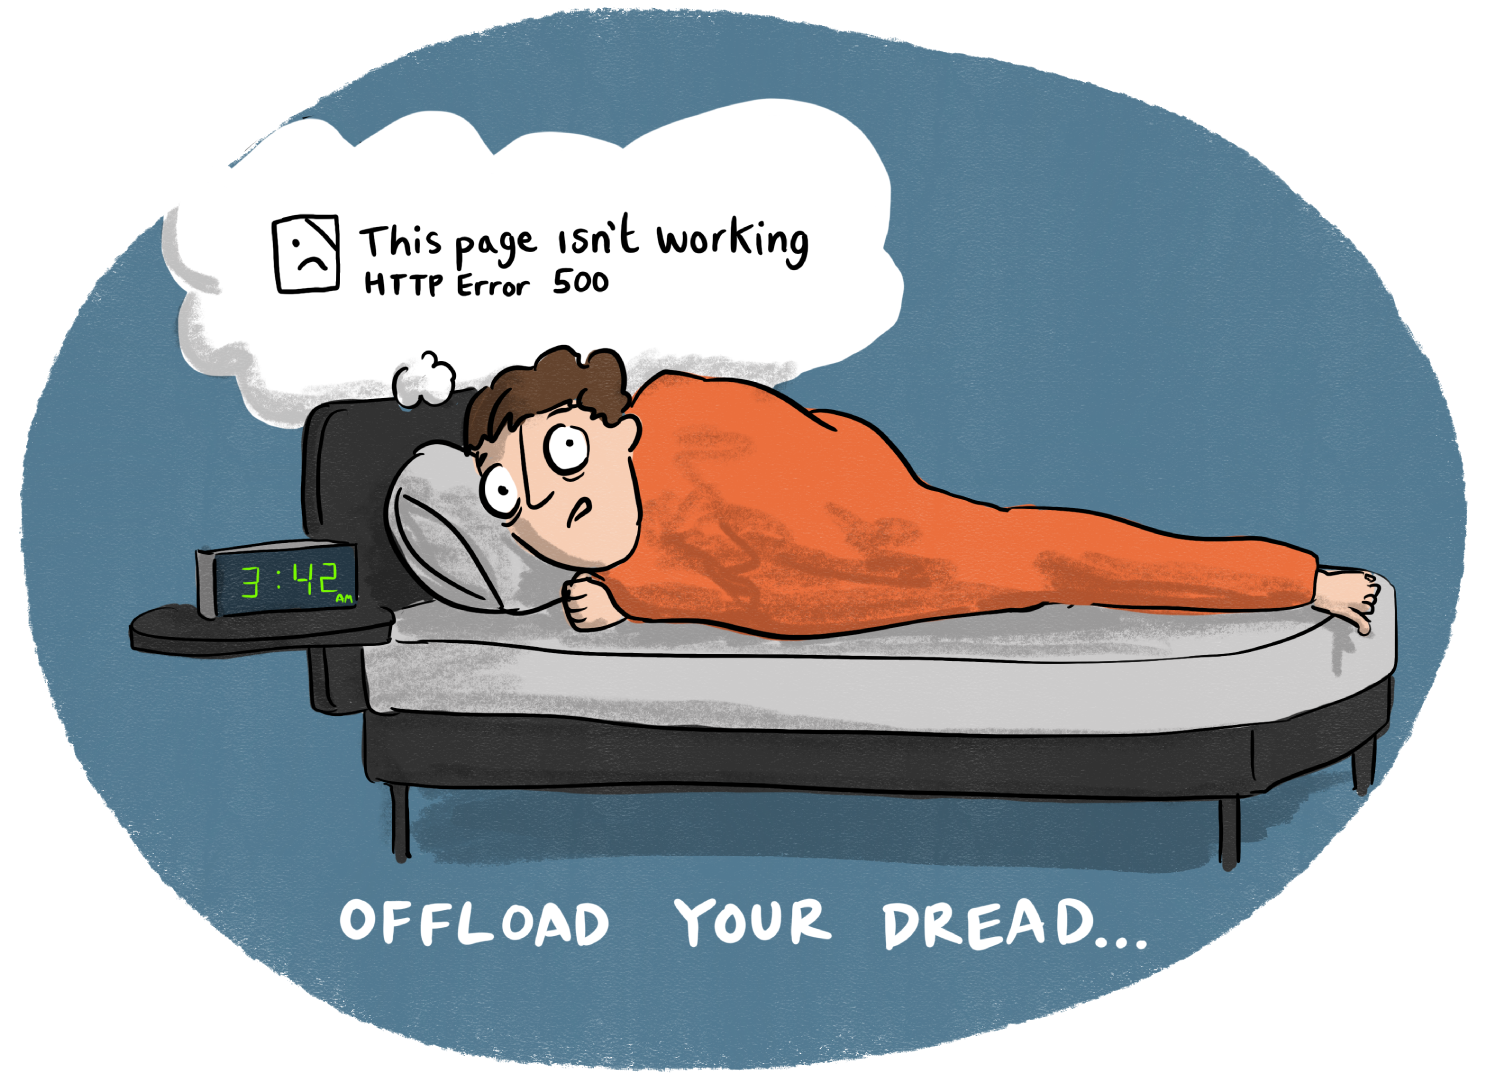 Image of a sleepless night with the caption "Offload your dread". 